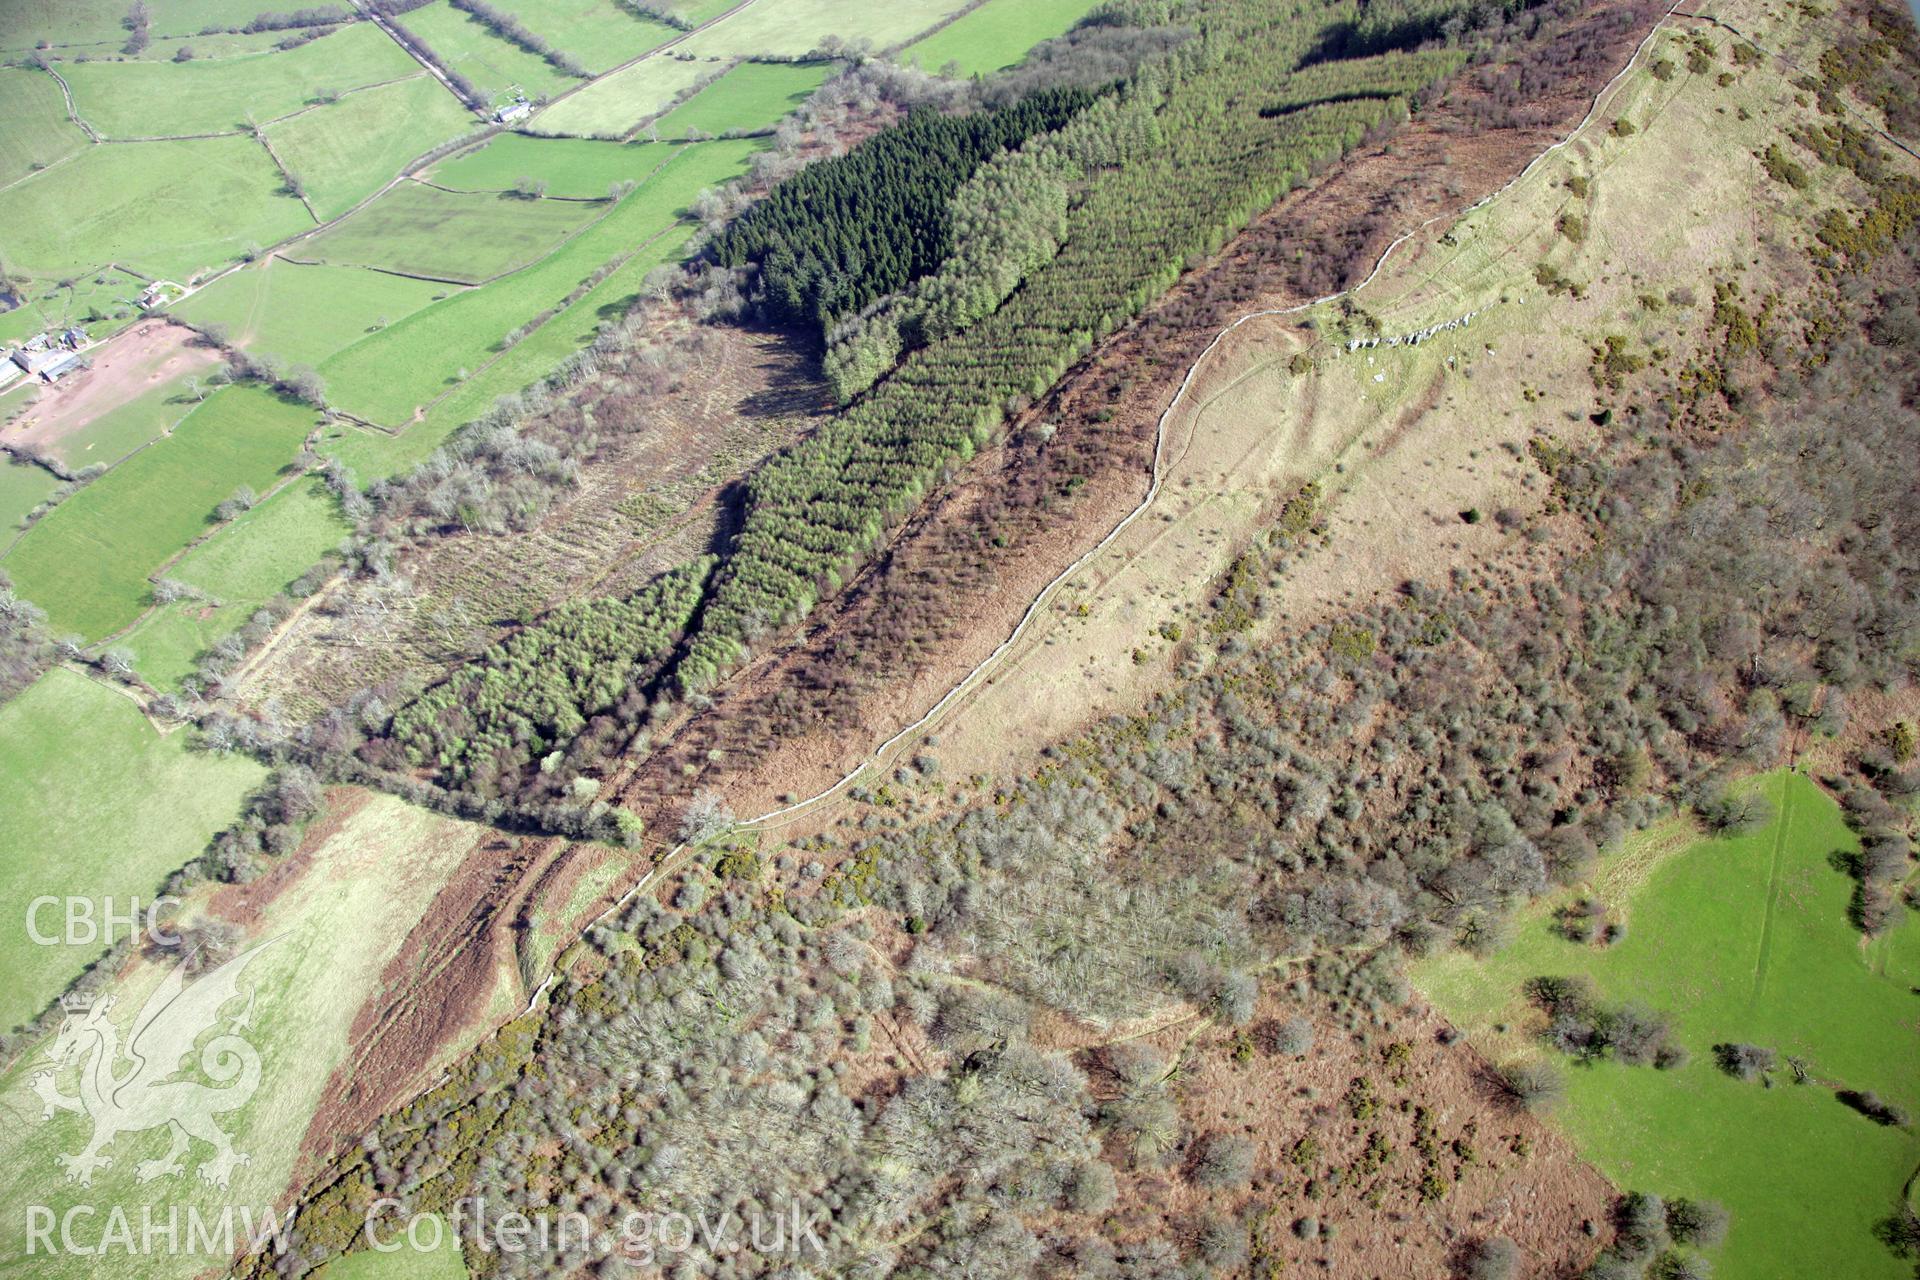 RCAHMW colour oblique photograph of Allt yr Esgair Hillfort. Taken by Toby Driver and Oliver Davies on 28/03/2012.